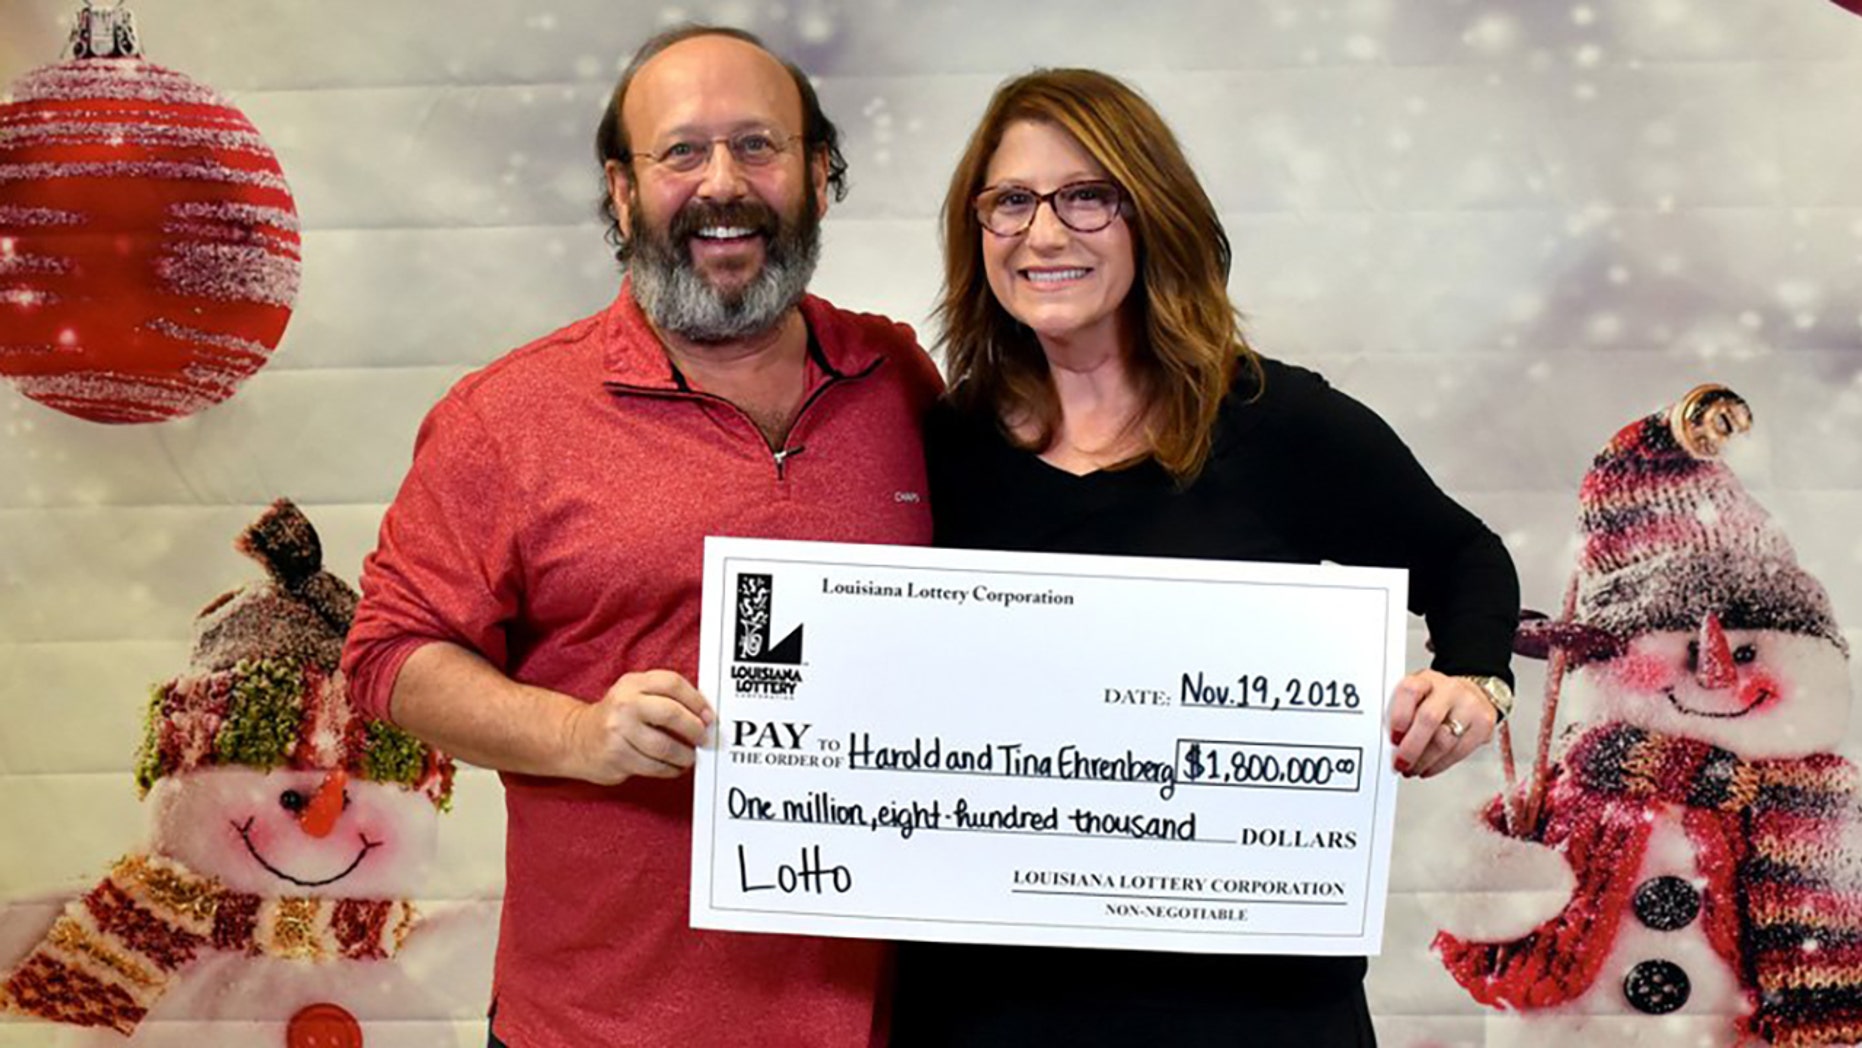 Harold and Tina Ehrenberg were cleaning up their home this week before the holidays when they found a $ 1.8 million prize-winning lottery ticket, officials at the Louisiana Lottery said. .